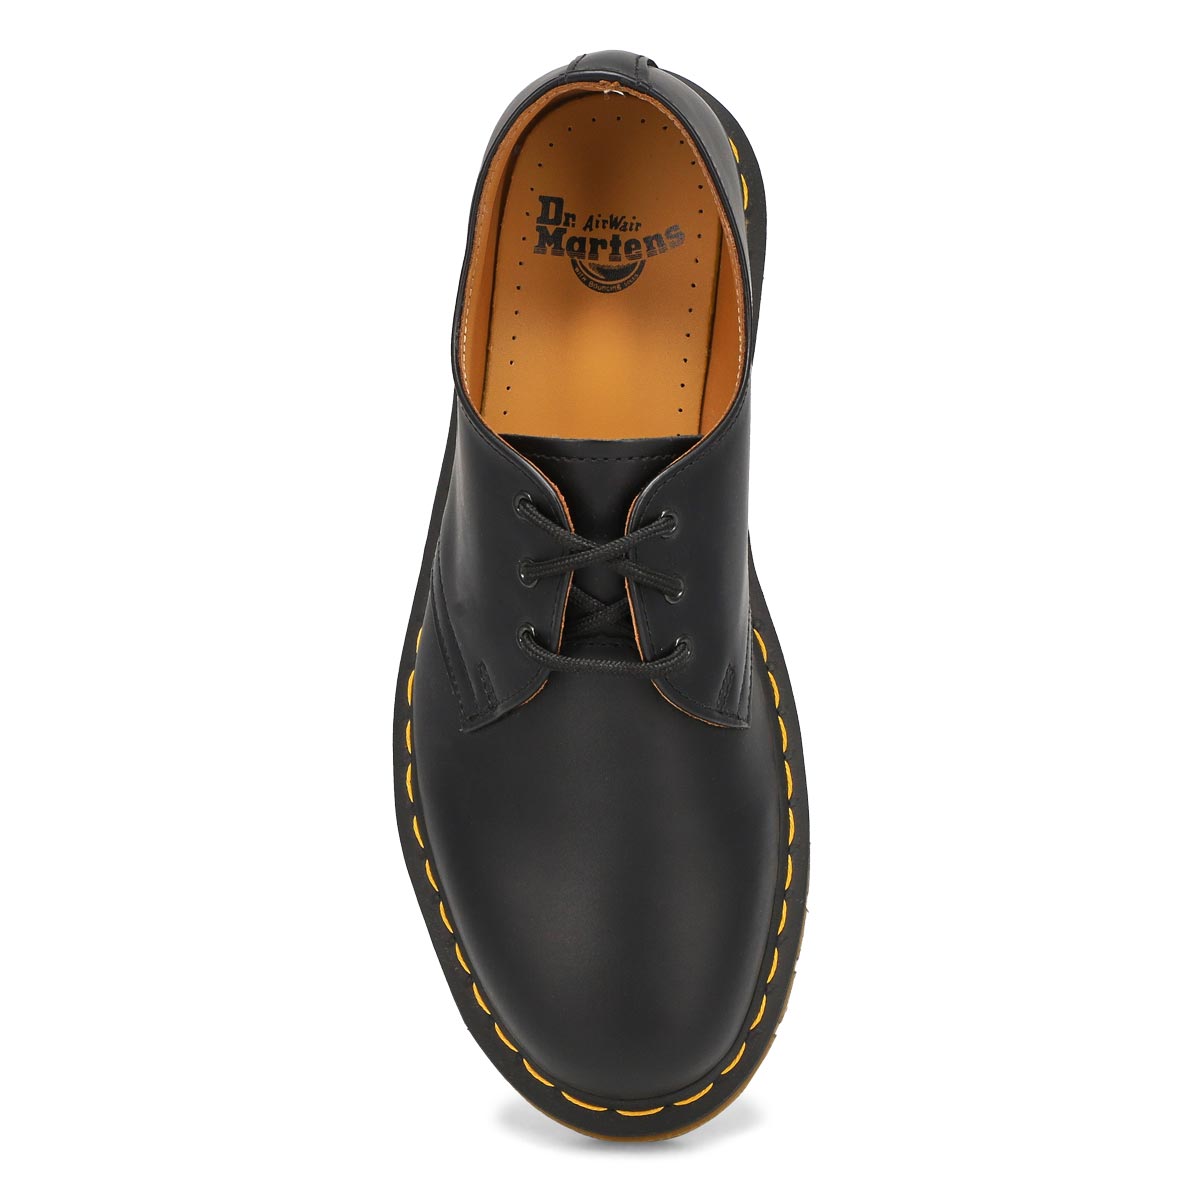 1461 Slip Resistant Leather Oxford Shoes in Black